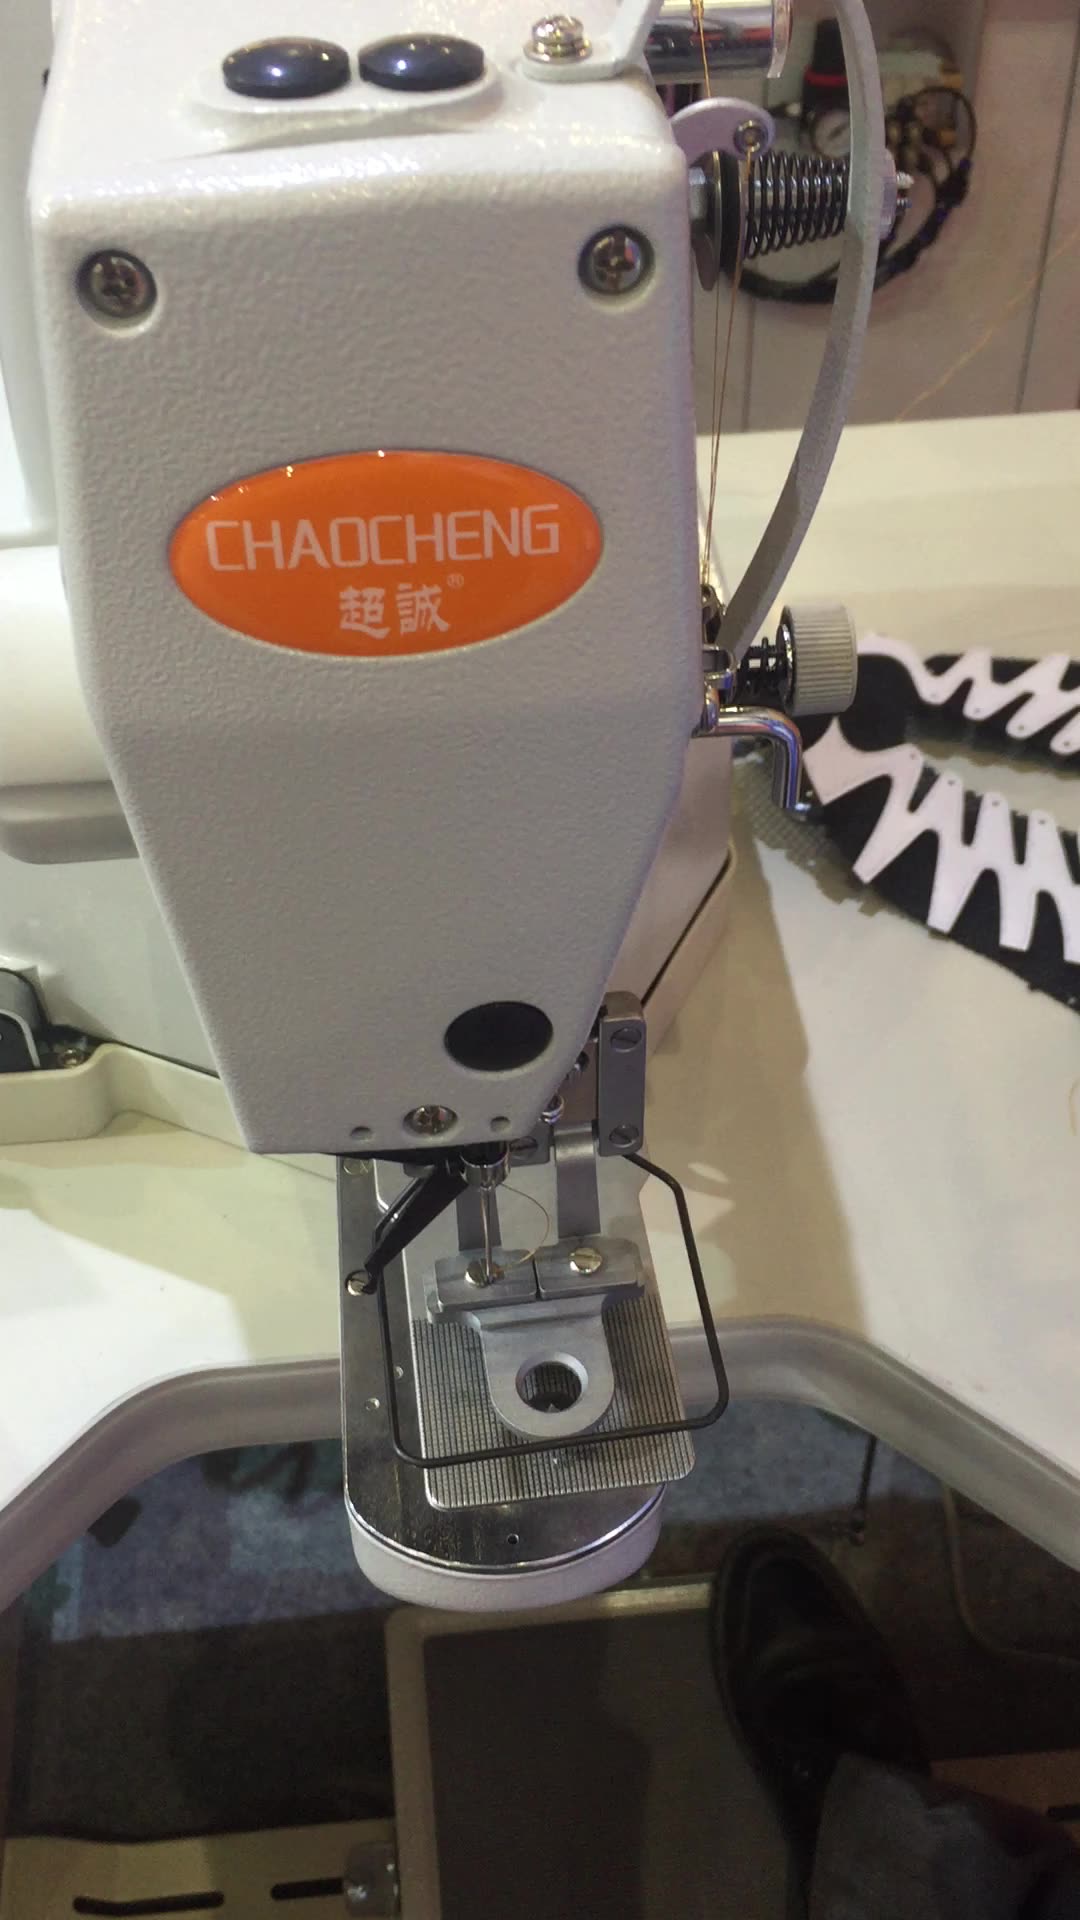 Automatic Button Sewing machine for button attaching